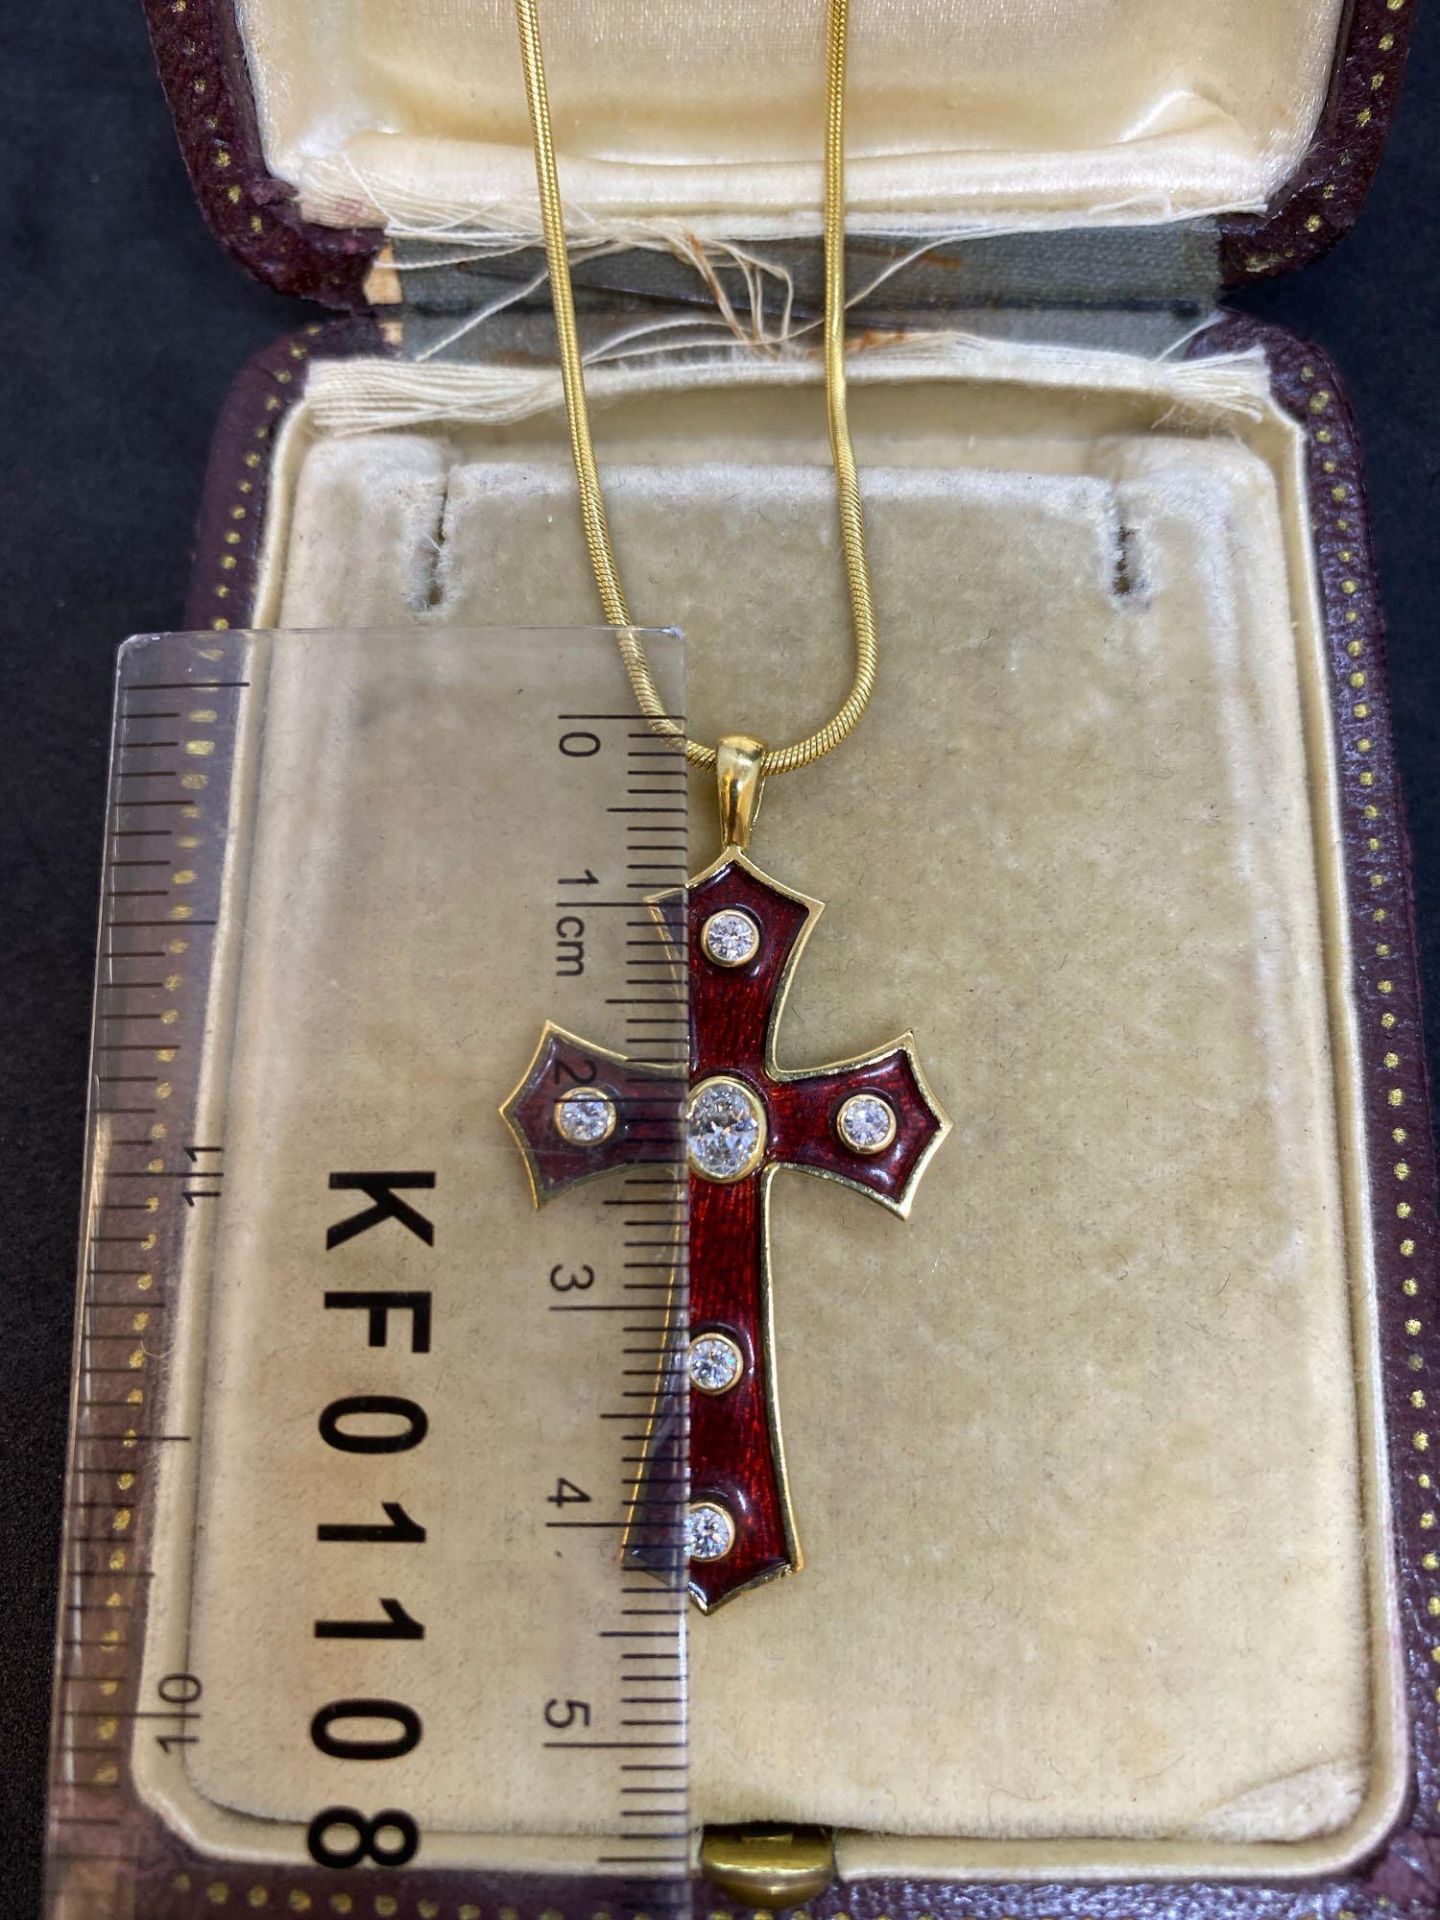 18ct Gold Diamond & Enamel Cross with 14ct Gold 22" Snake Chain - 17.3 Grams - Image 4 of 5